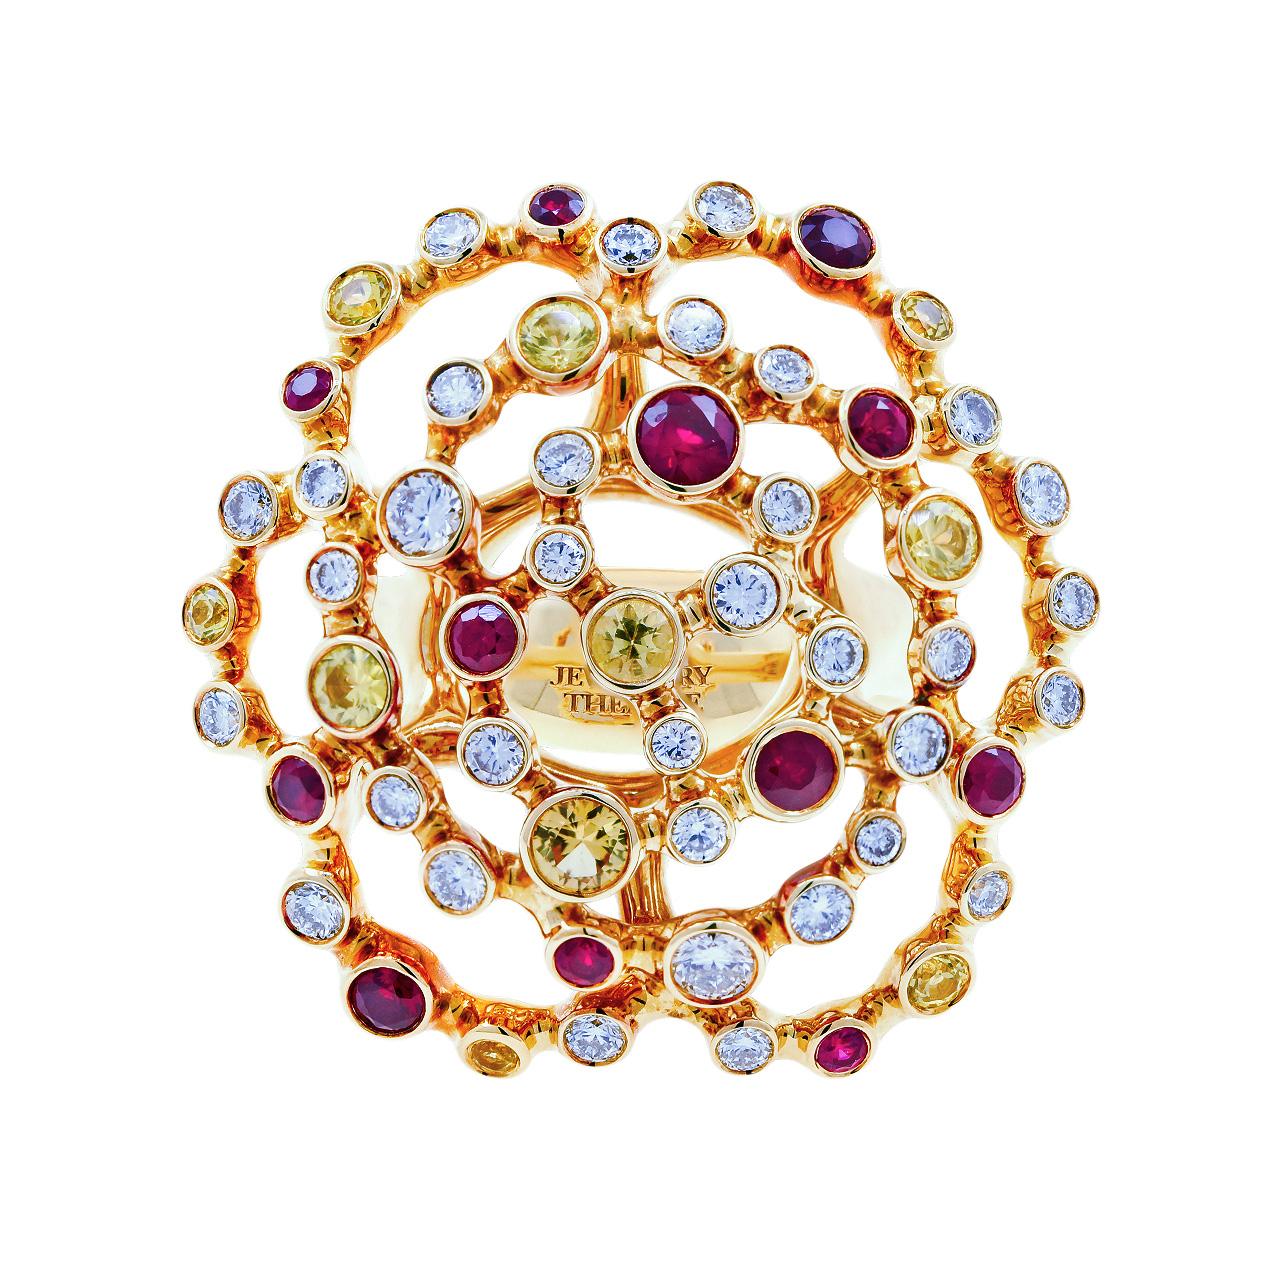 - 34 Round Diamonds - 0.85 ct, G/VVS1-VS1
- 36 Round Yellow Sapphires - 0.84 ct
- 12 Round Rubies - 0.75 ct
- 18K Yellow Gold 
- Weight: 16.57 g
- Size: 17.5 mm
This elegant ring from the Byzantium collection is encrusted with 0.85 ct of diamonds,